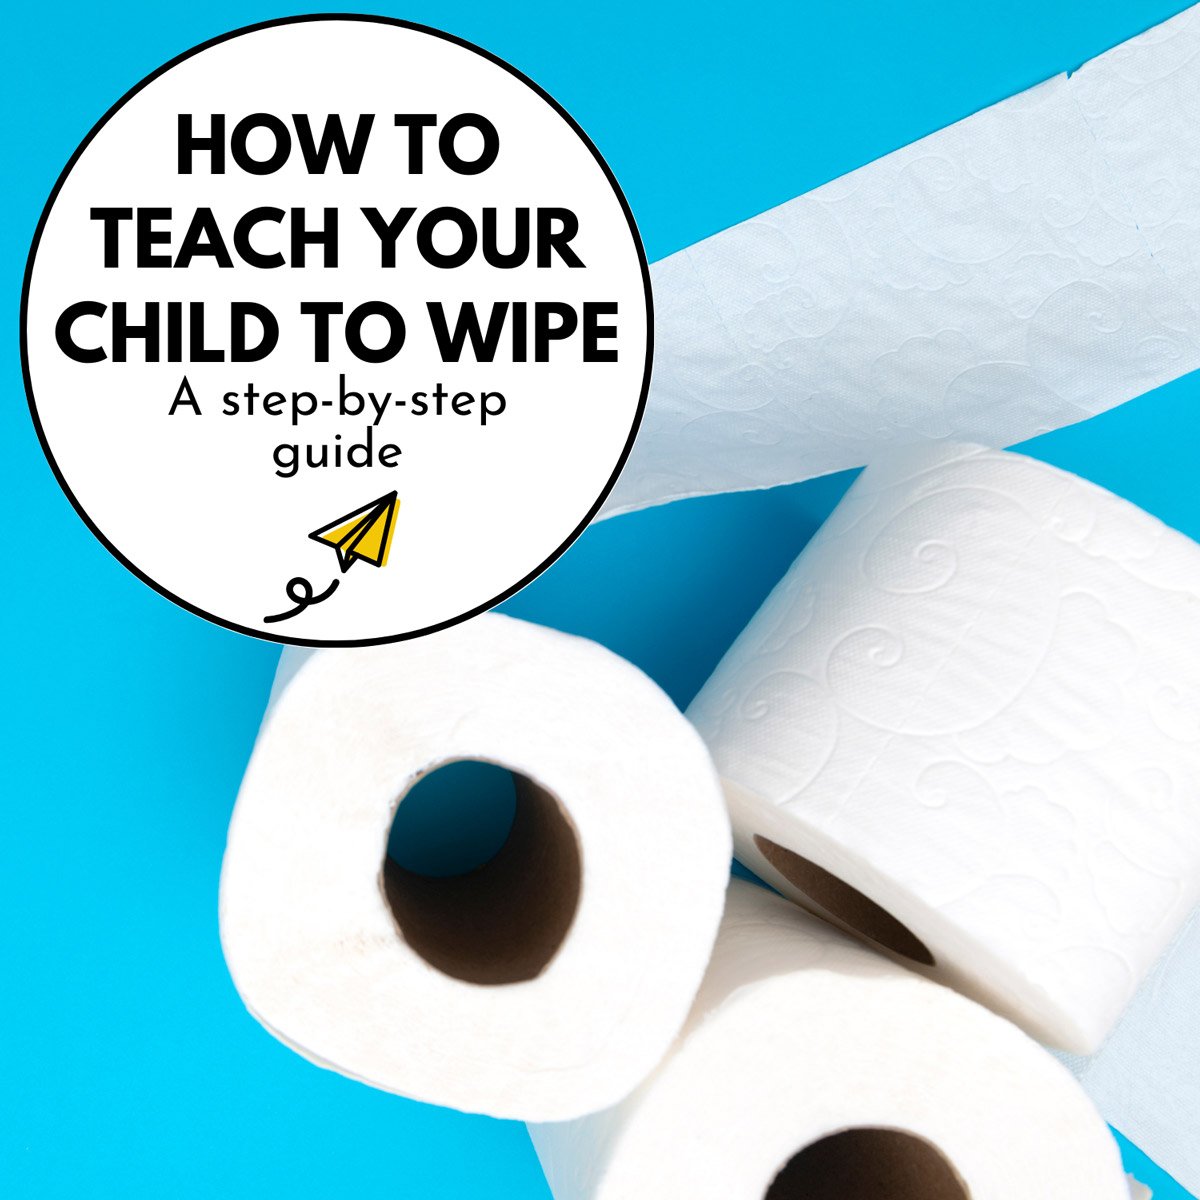 How to teach your child to wipe: a step by step guide. Image is a blue background with rolls of toilet paper.